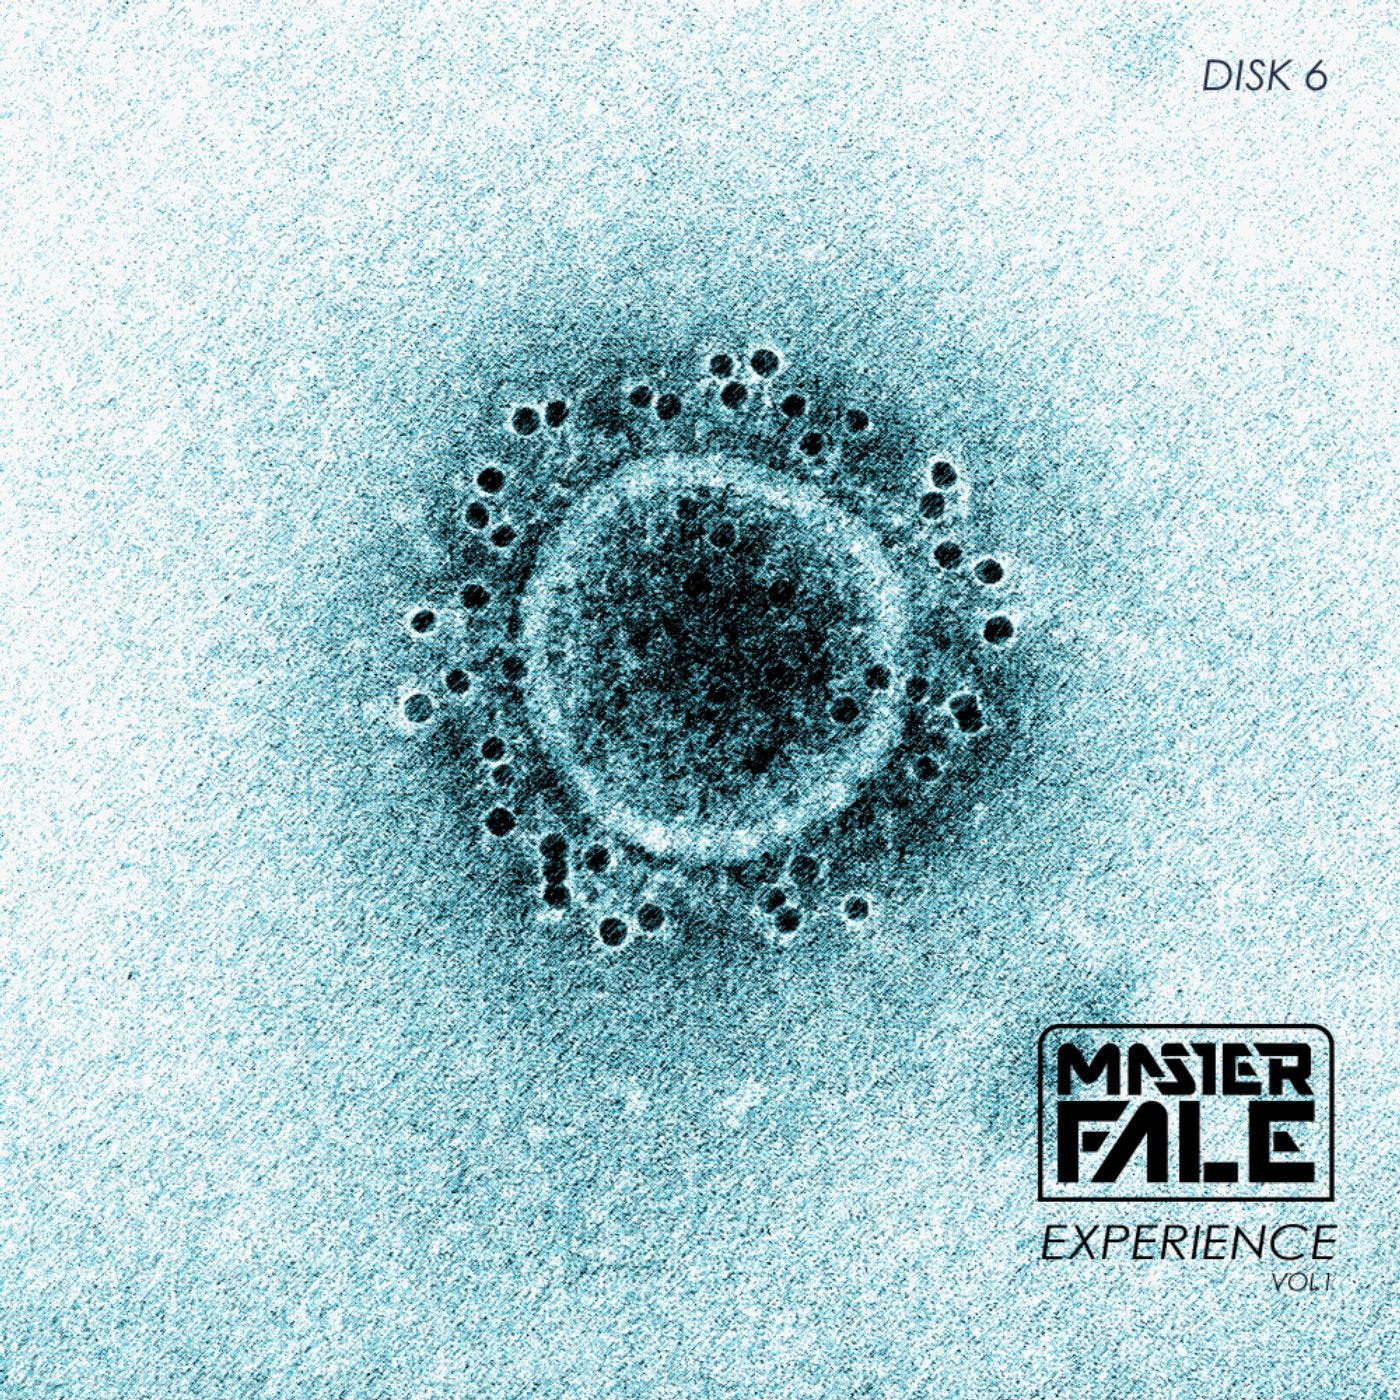 Master Fale Experiance, Vol1: Disc 6